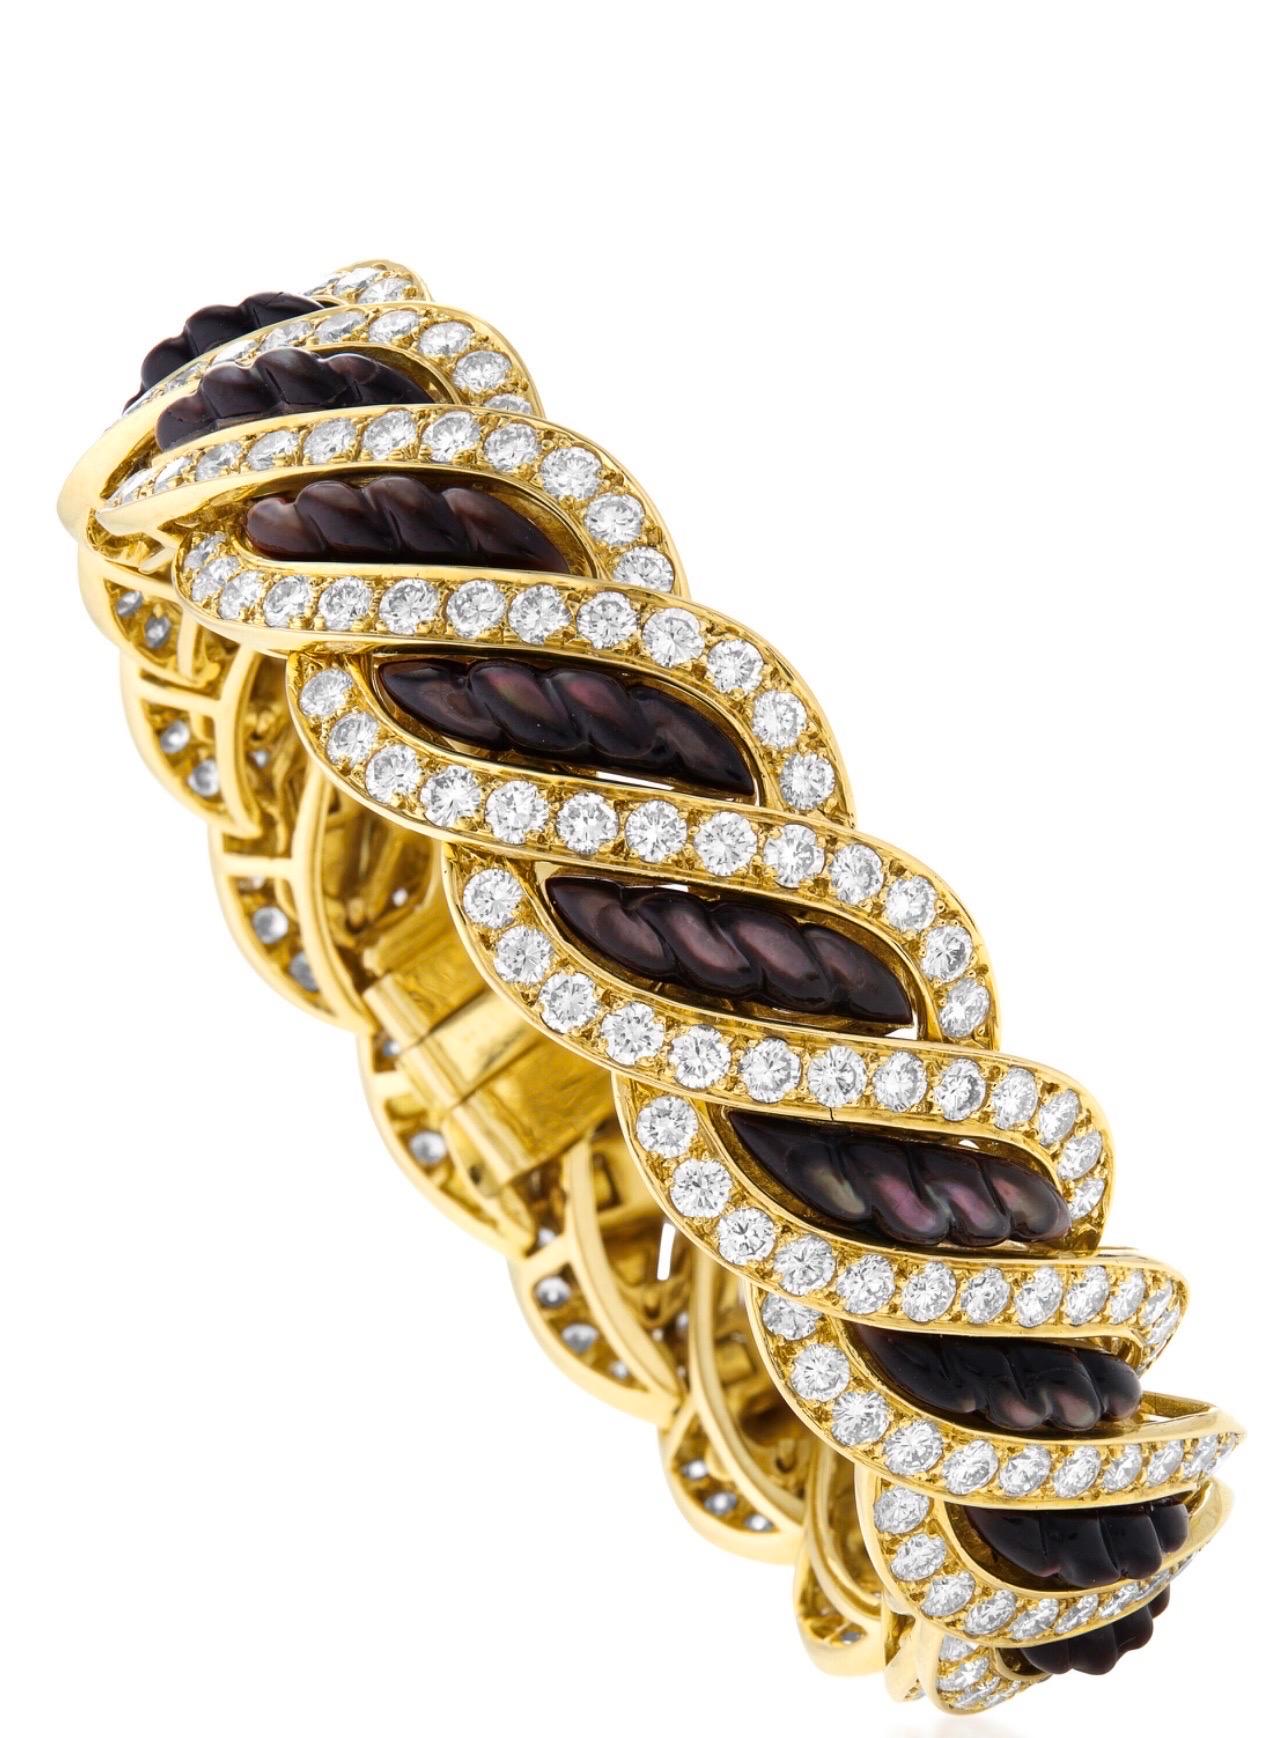 Bold and stunningly fashionable, this remarkable bracelet is designed by Mauboussin and boasts incredibly offbeat, eye-catching appearance. The bracelet is made of radiant 18K yellow gold and it is embellished with black mother of pearl and